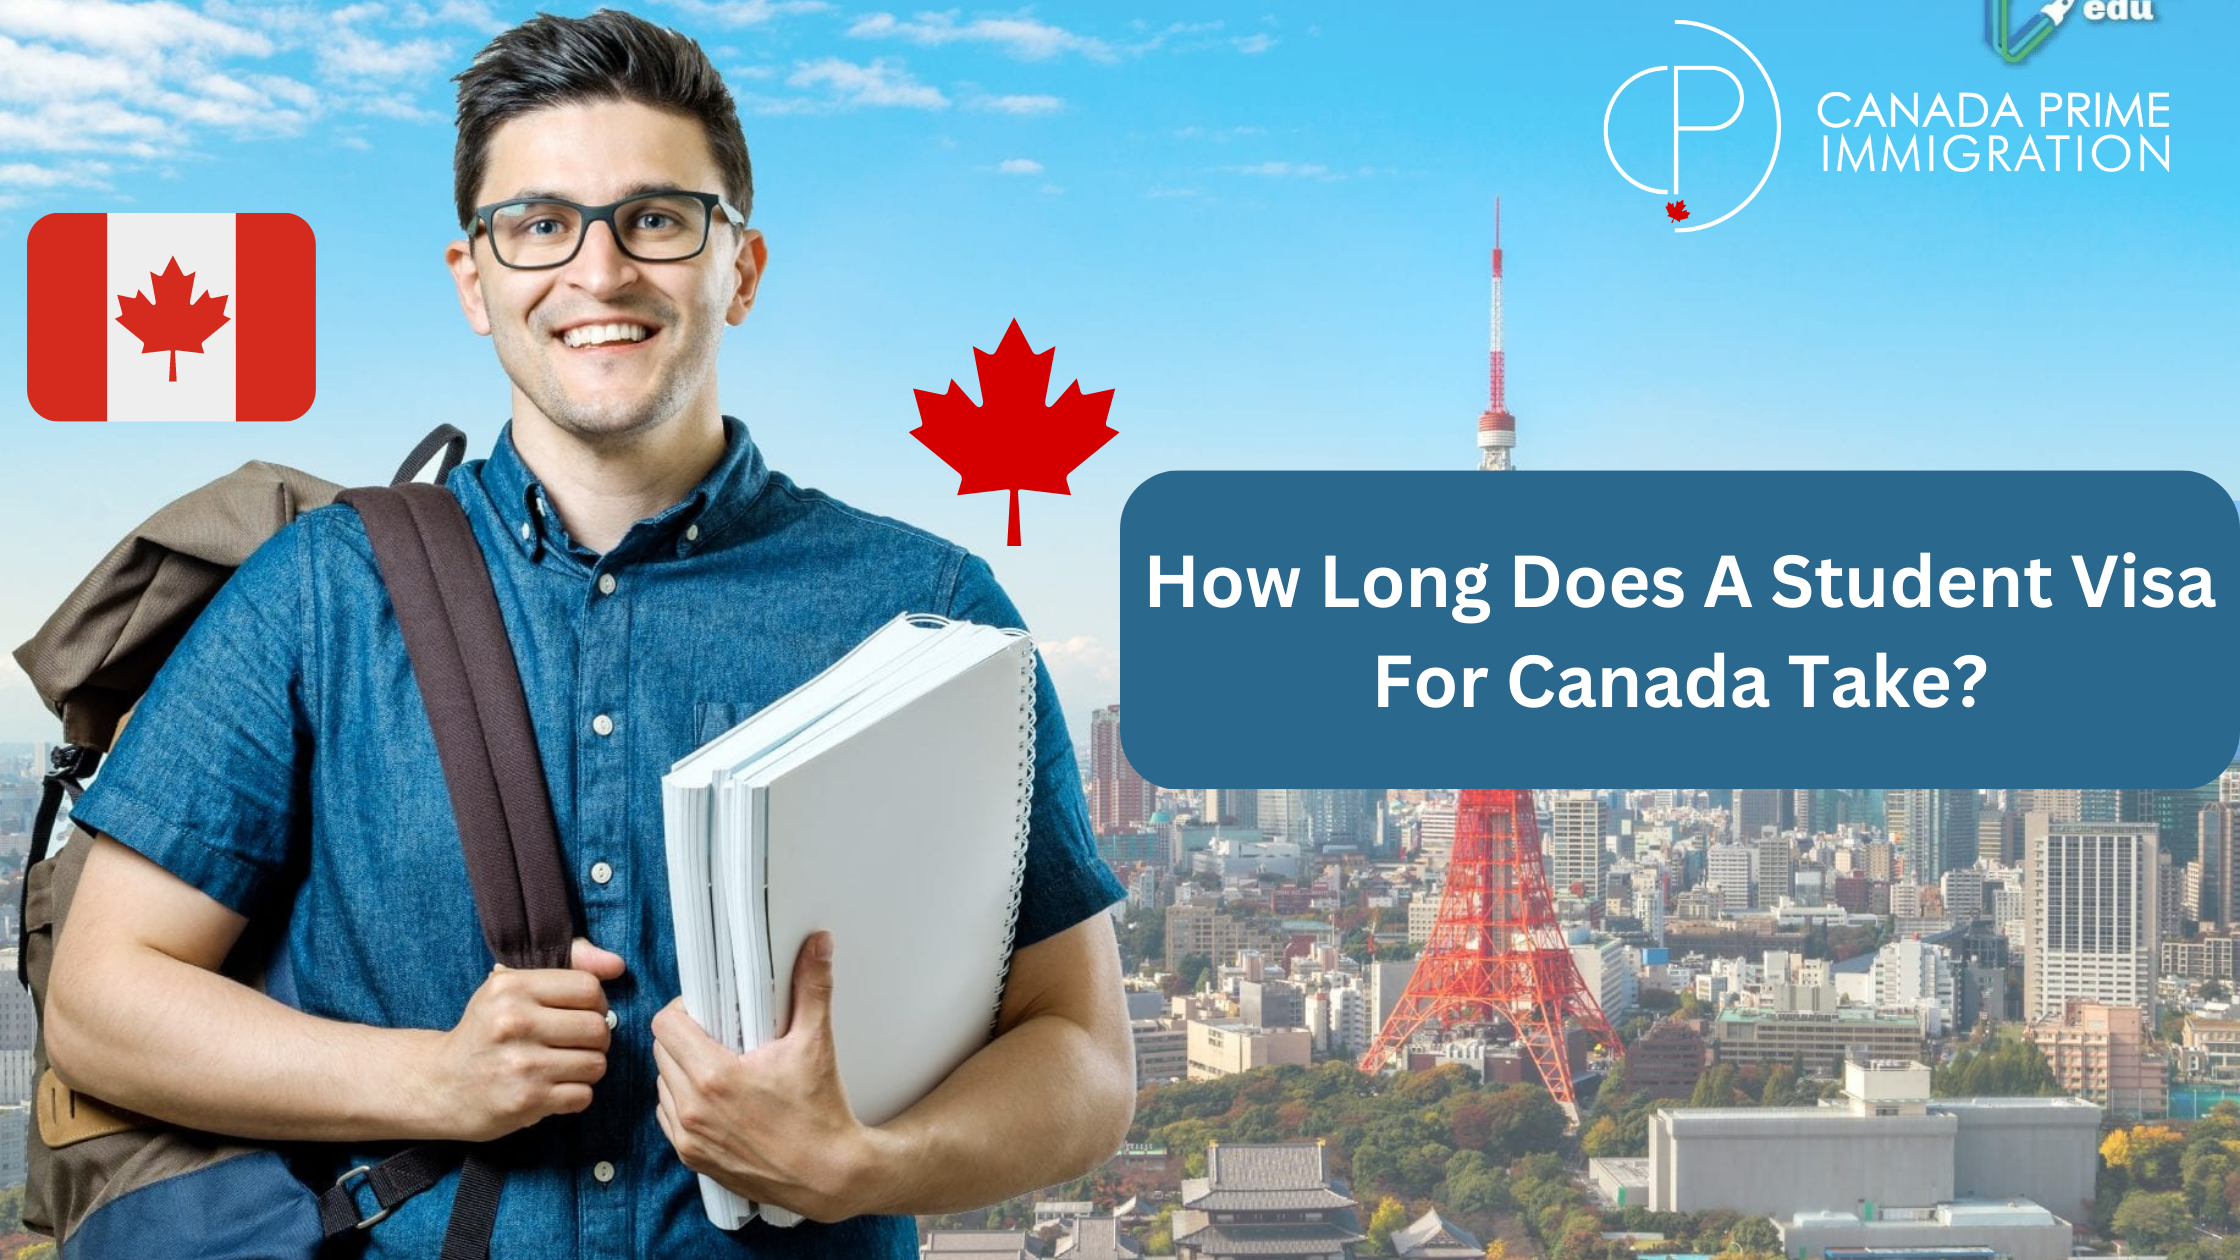 How Long Does A Student Visa For Canada Take?